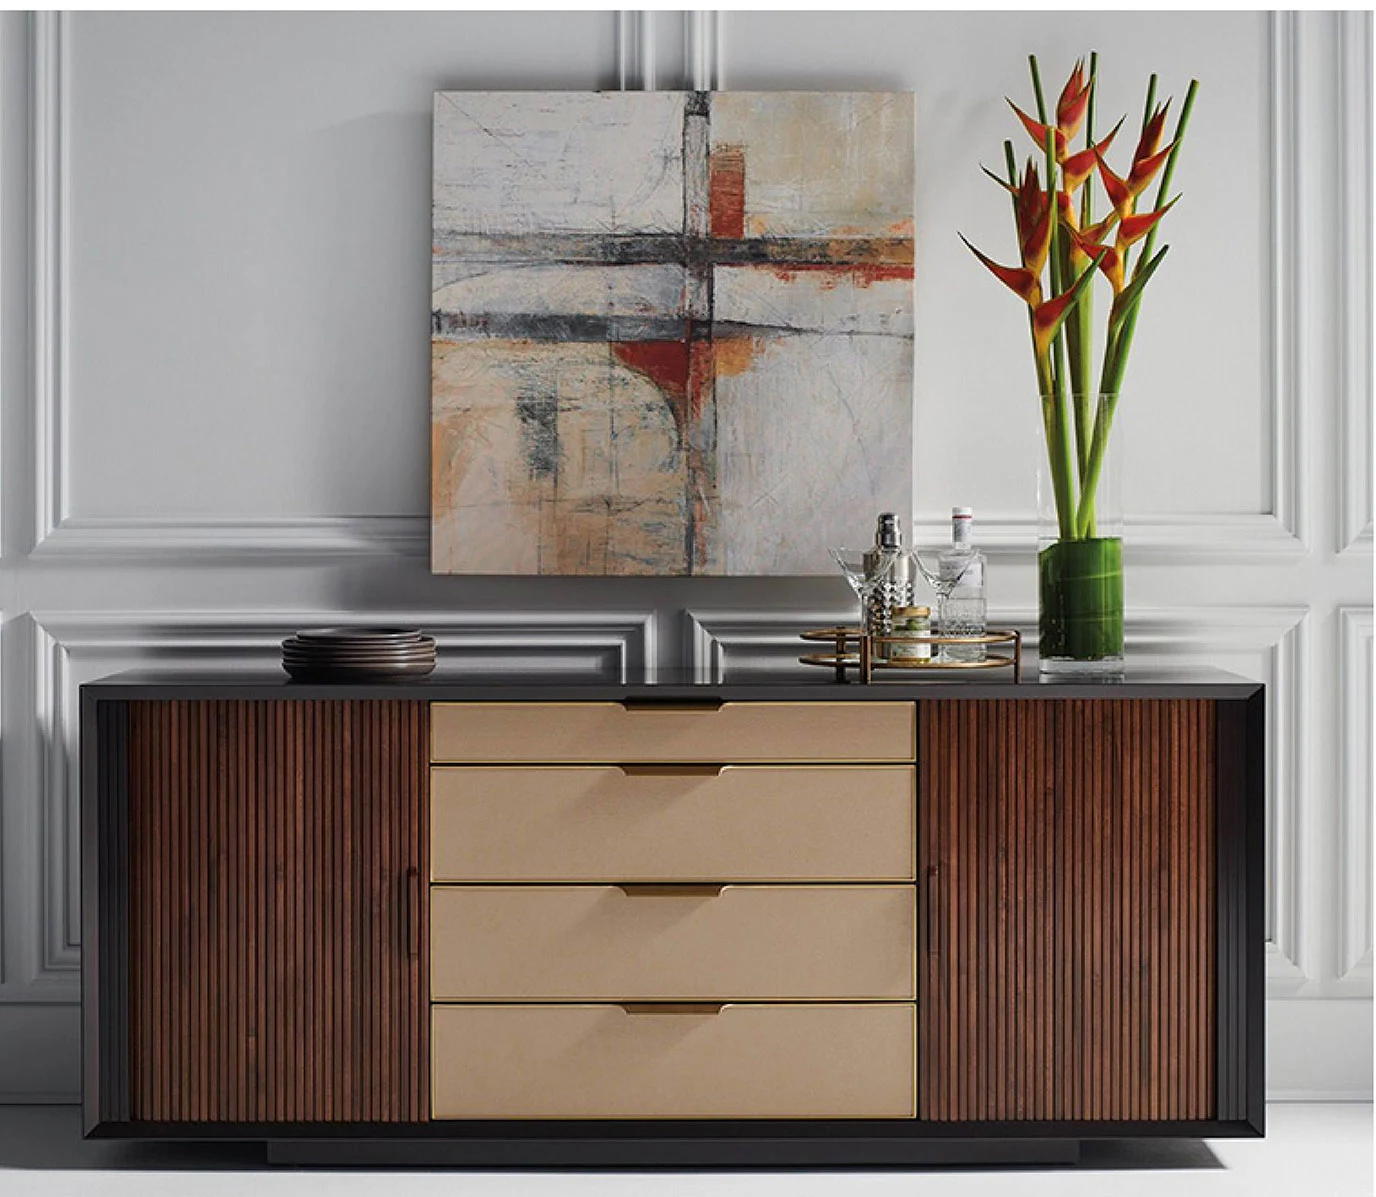 Shop Credenzas and Buffet Cabinets